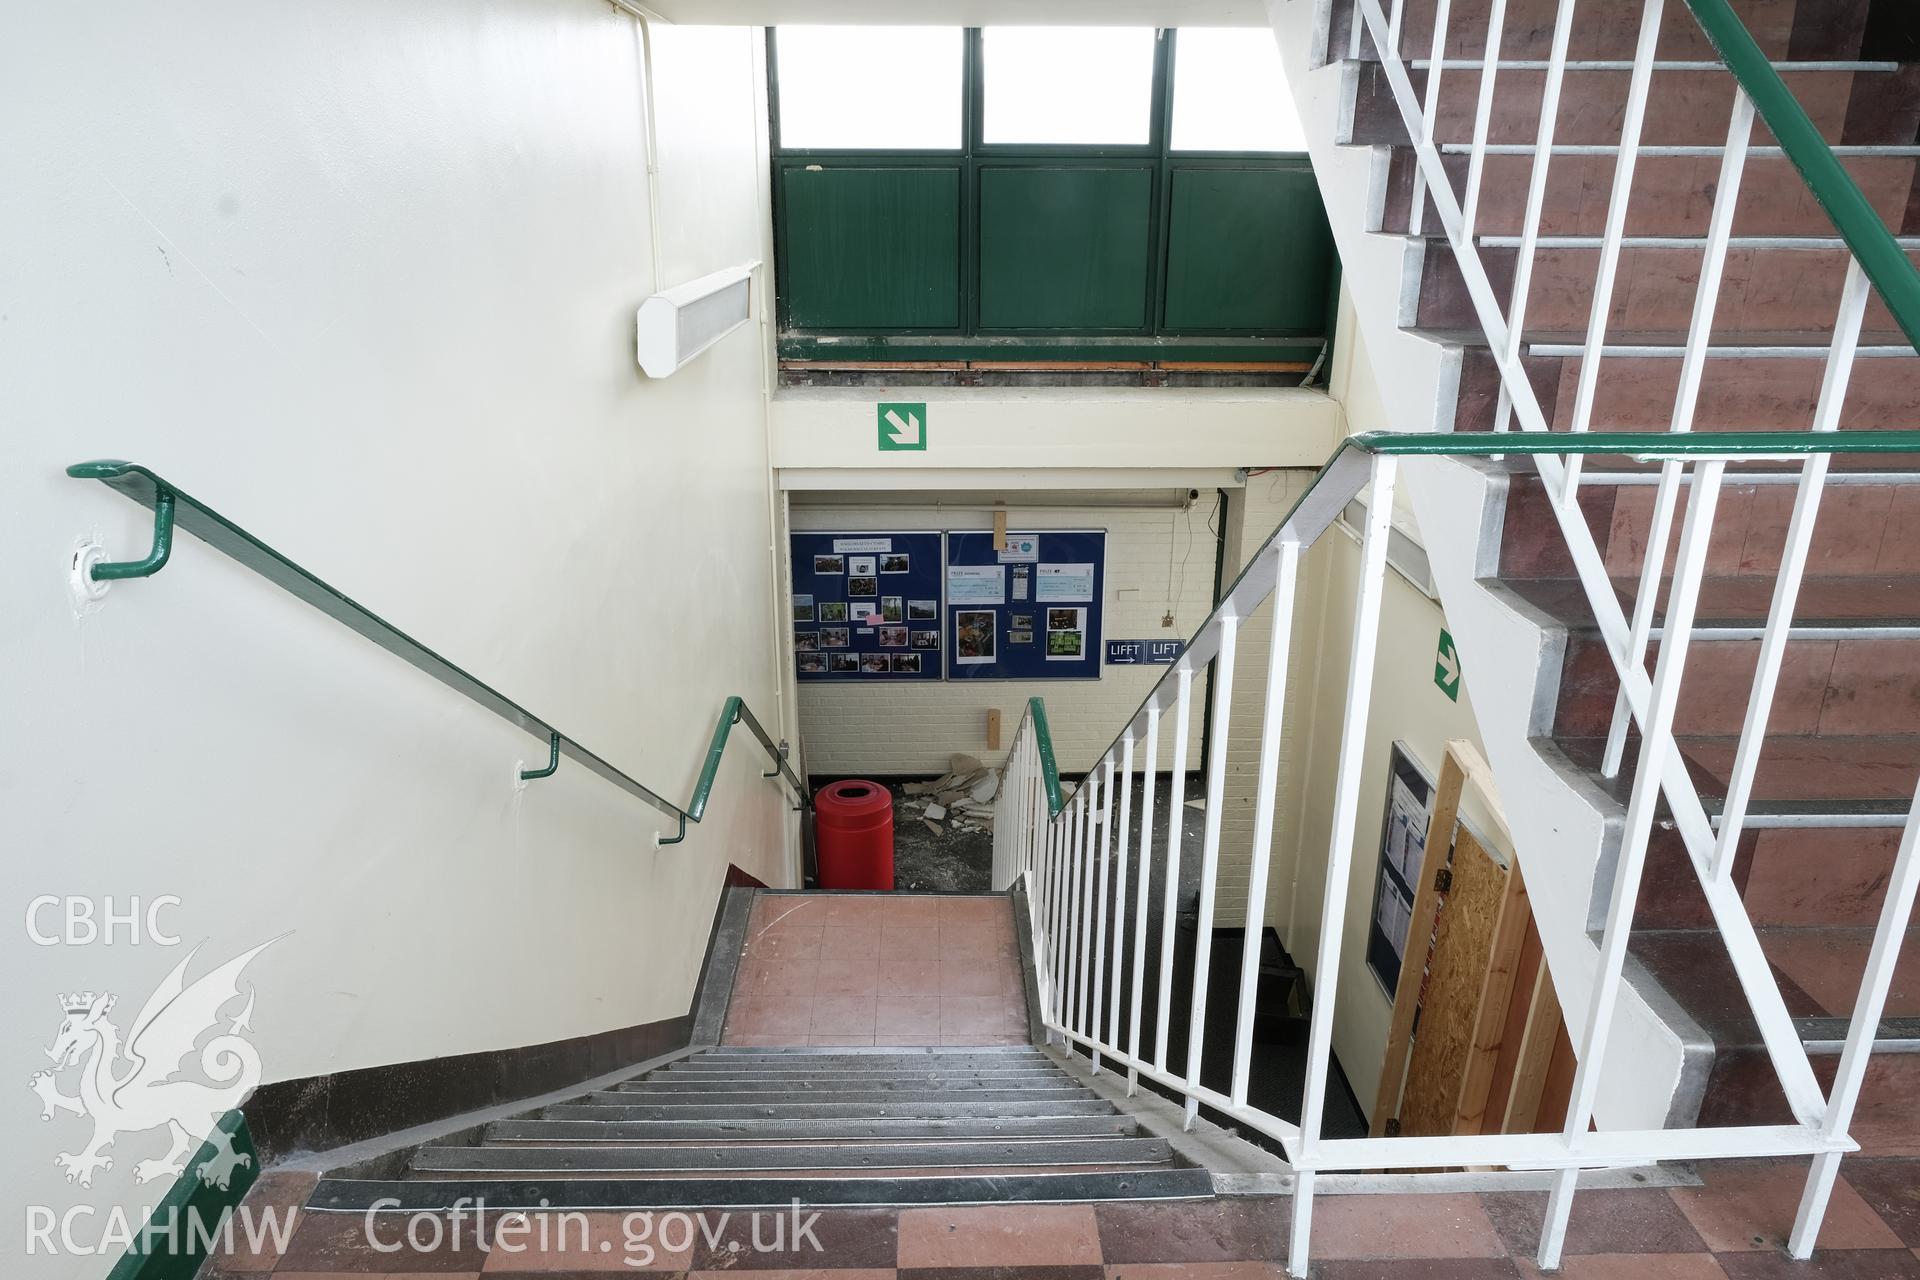 Digital colour photograph showing detailed interior view down the stairs at Caernarfonshire Technical College, Ffriddoedd Road, Bangor. Photographed by Dilys Morgan and donated by Wyn Thomas of Grwp Llandrillo-Menai Further Education College, 2019.